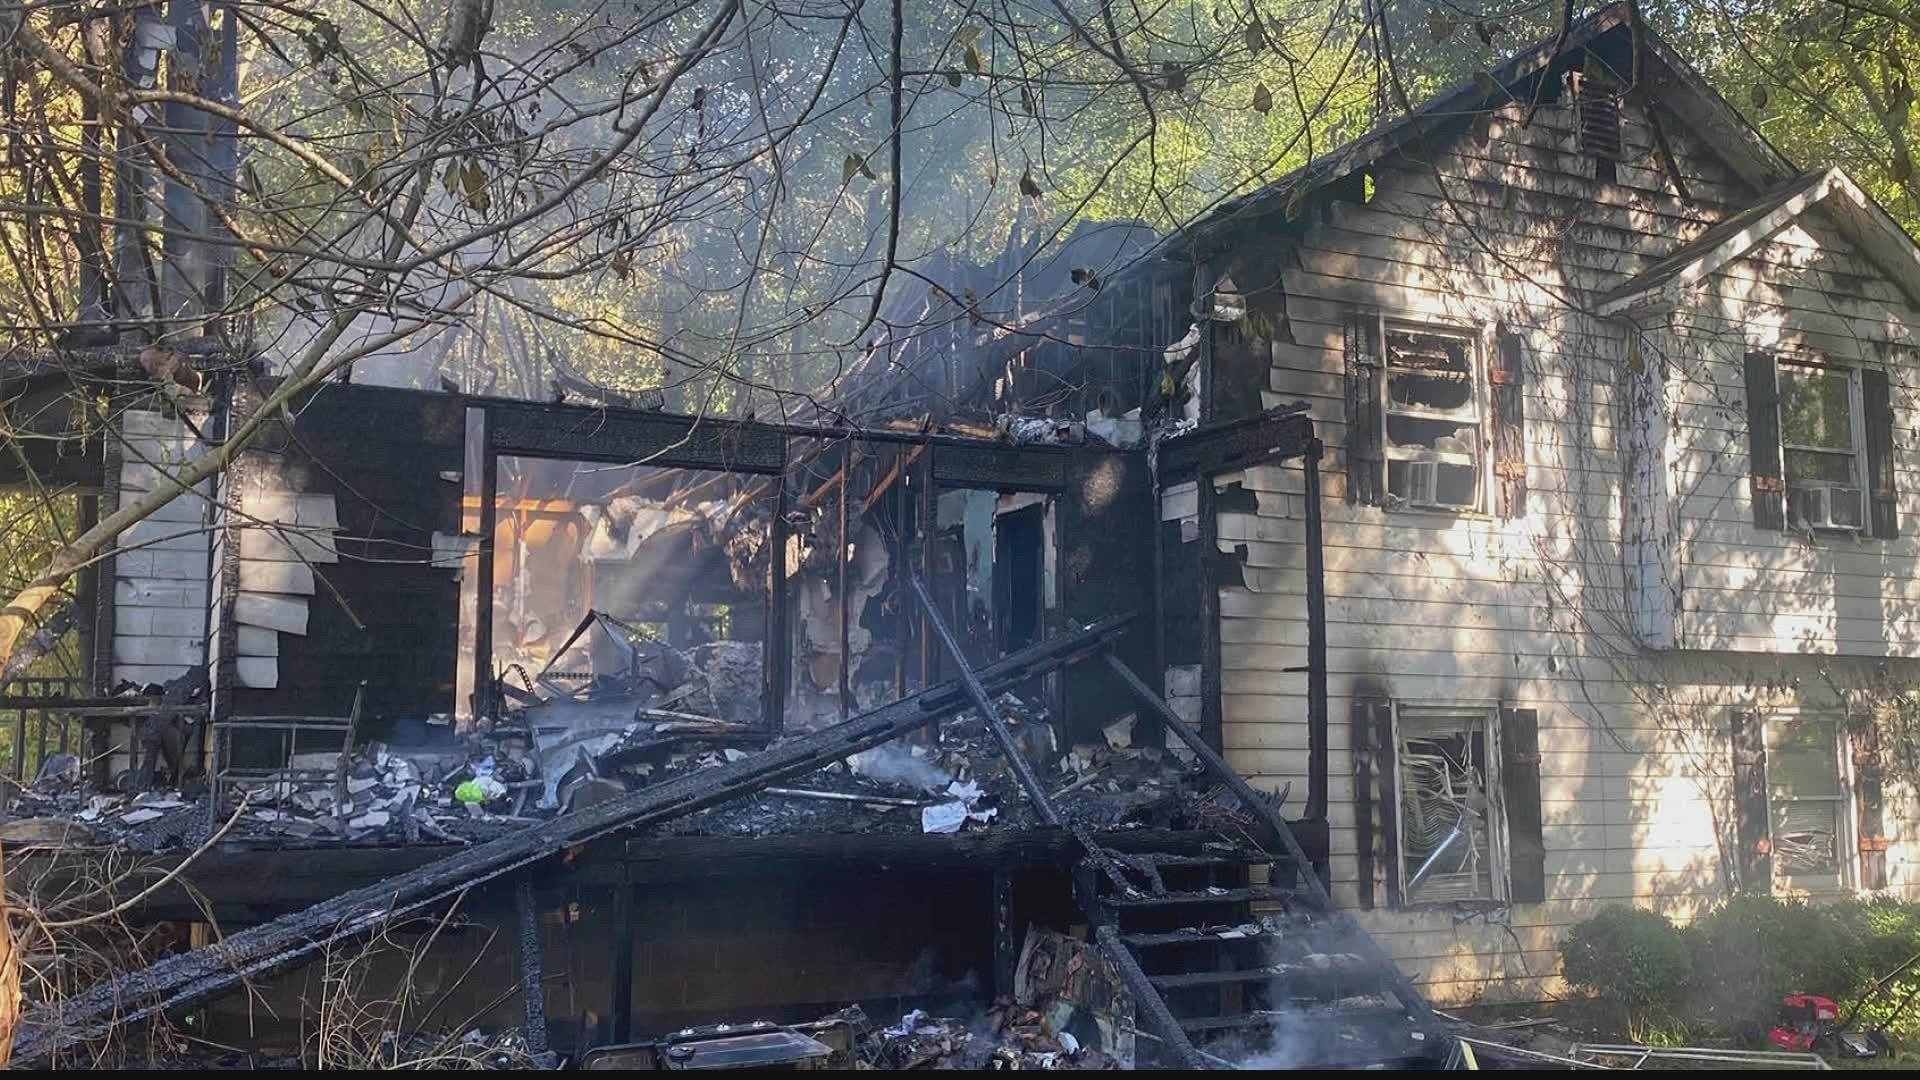 The two boys were home alone, according to fire officials. They added their mother had just arrived when the firefighters were working to extinguish the blaze.